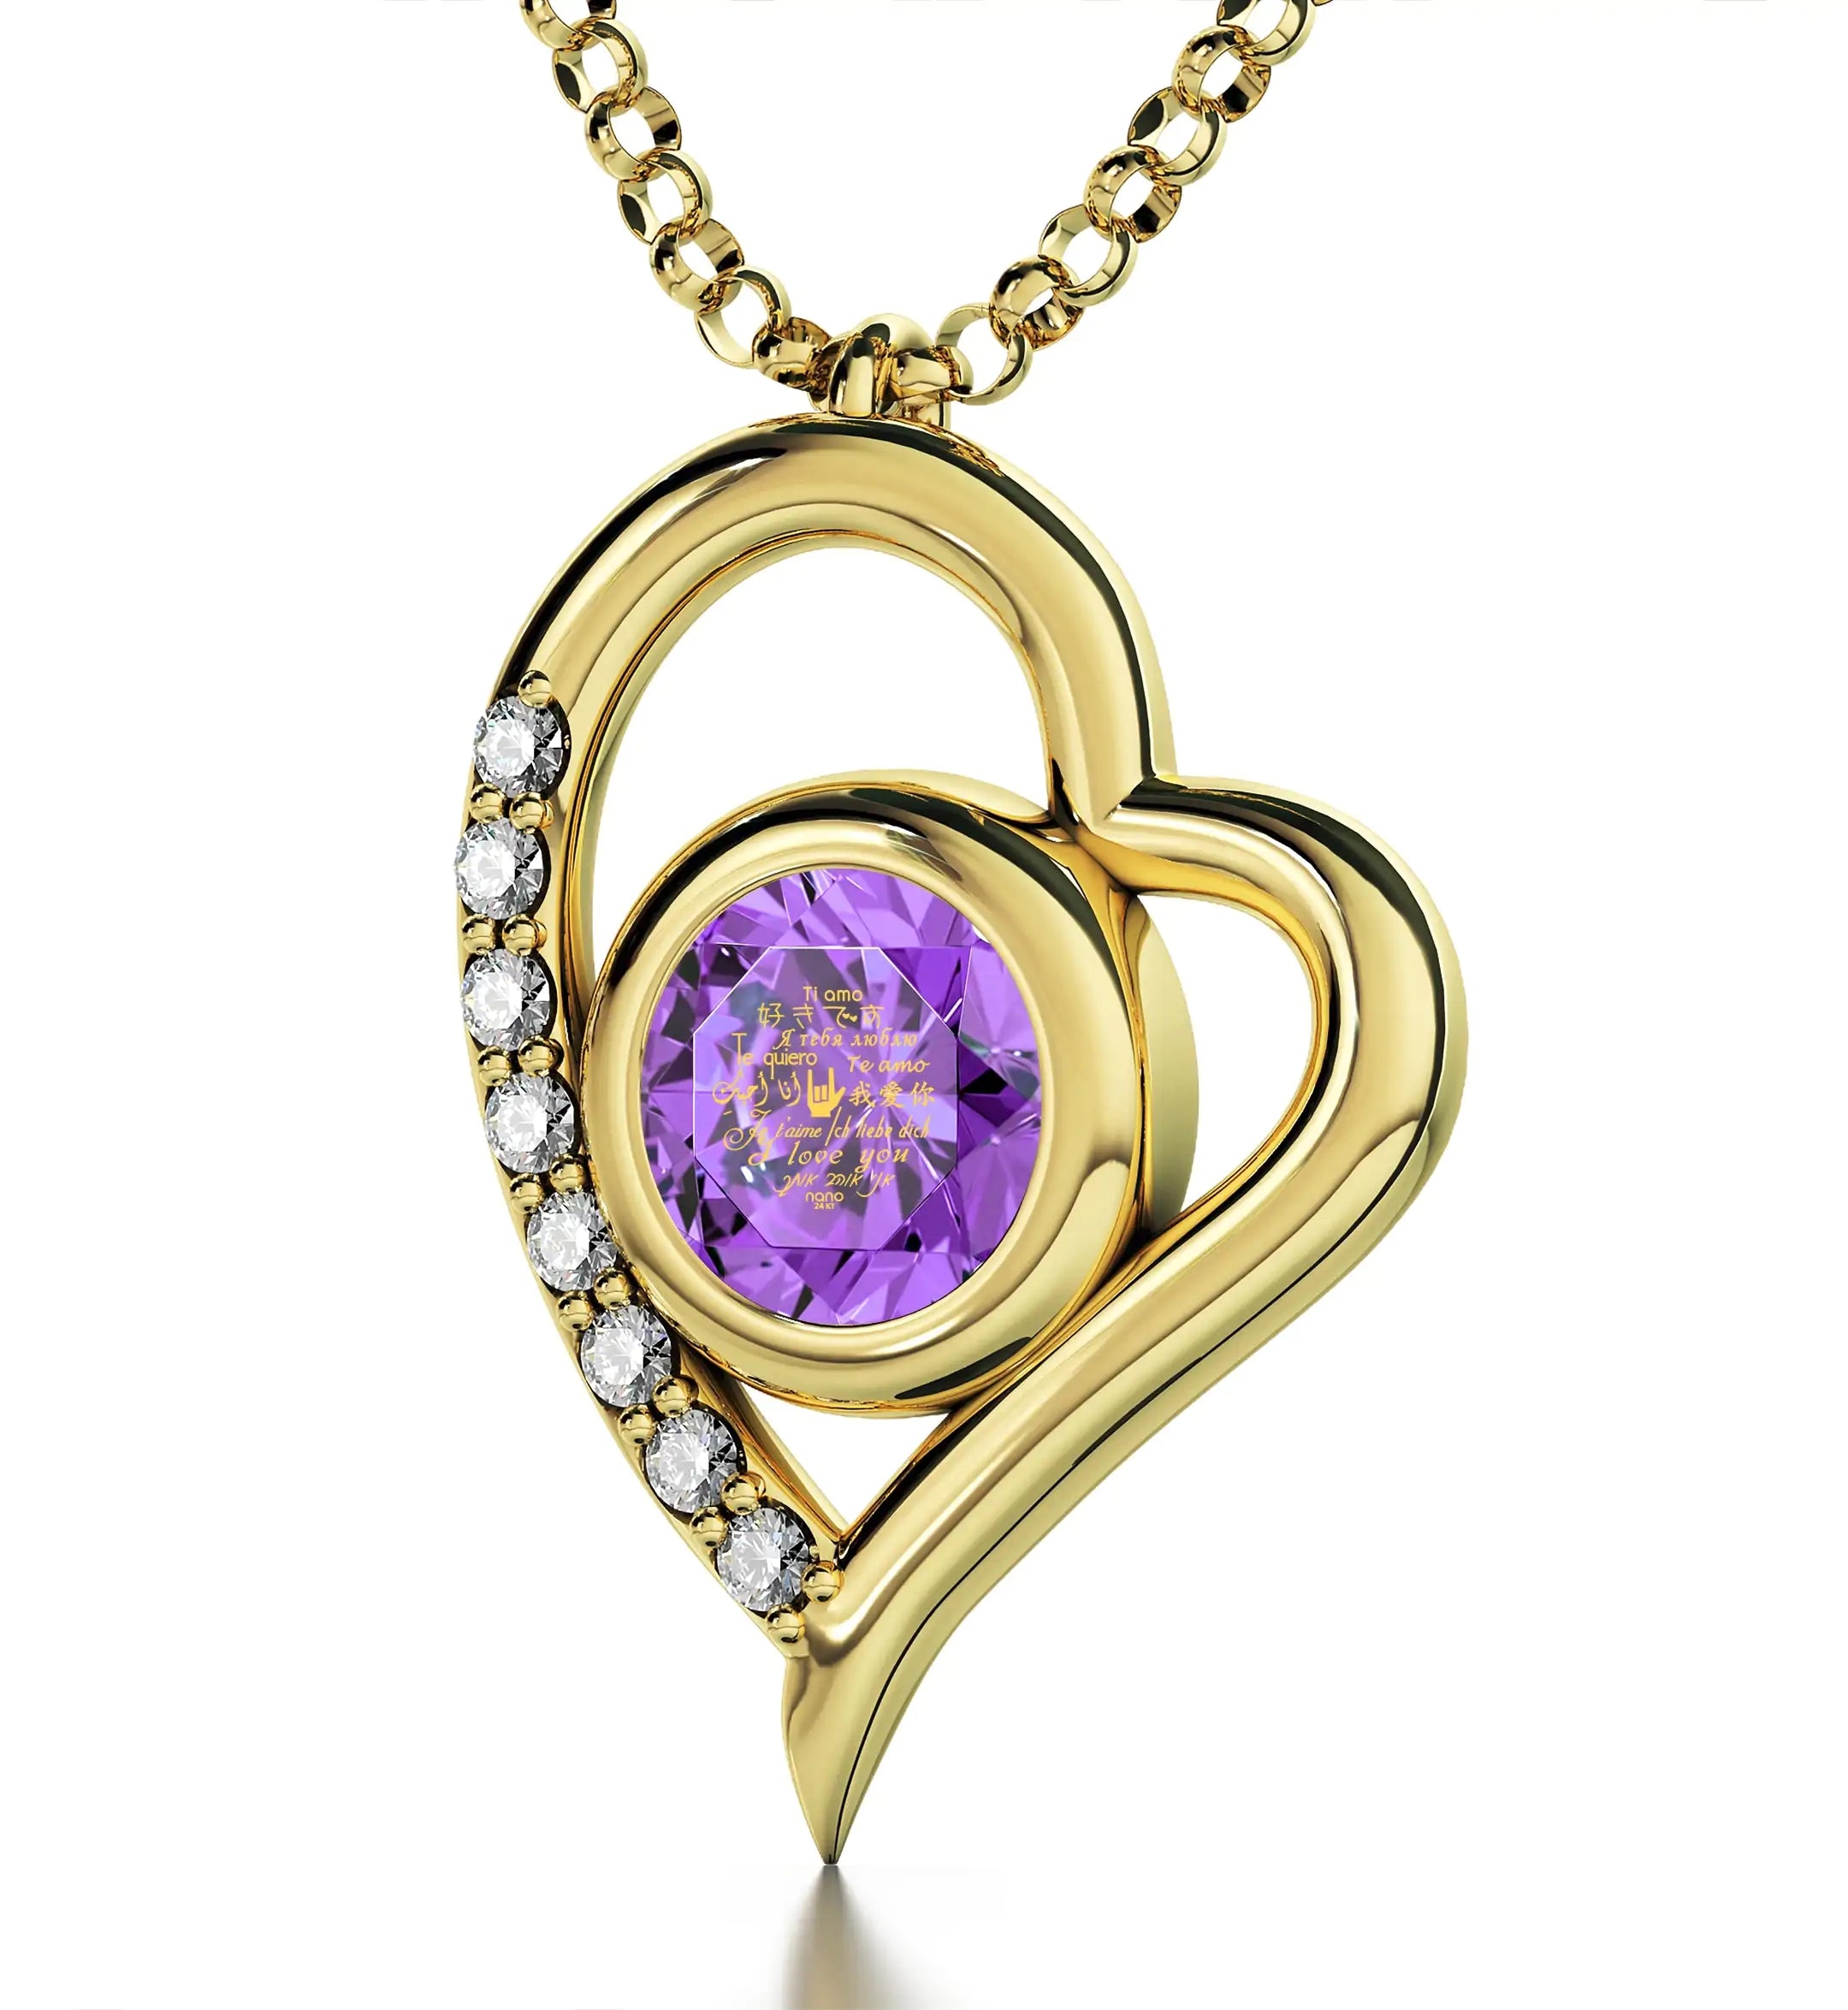 Close-up of a purple gemstone set in a Gold Plated Silver I Love You Necklace Heart Pendant, engraved with "i love you" in multiple languages, perfect as an anniversary gift.